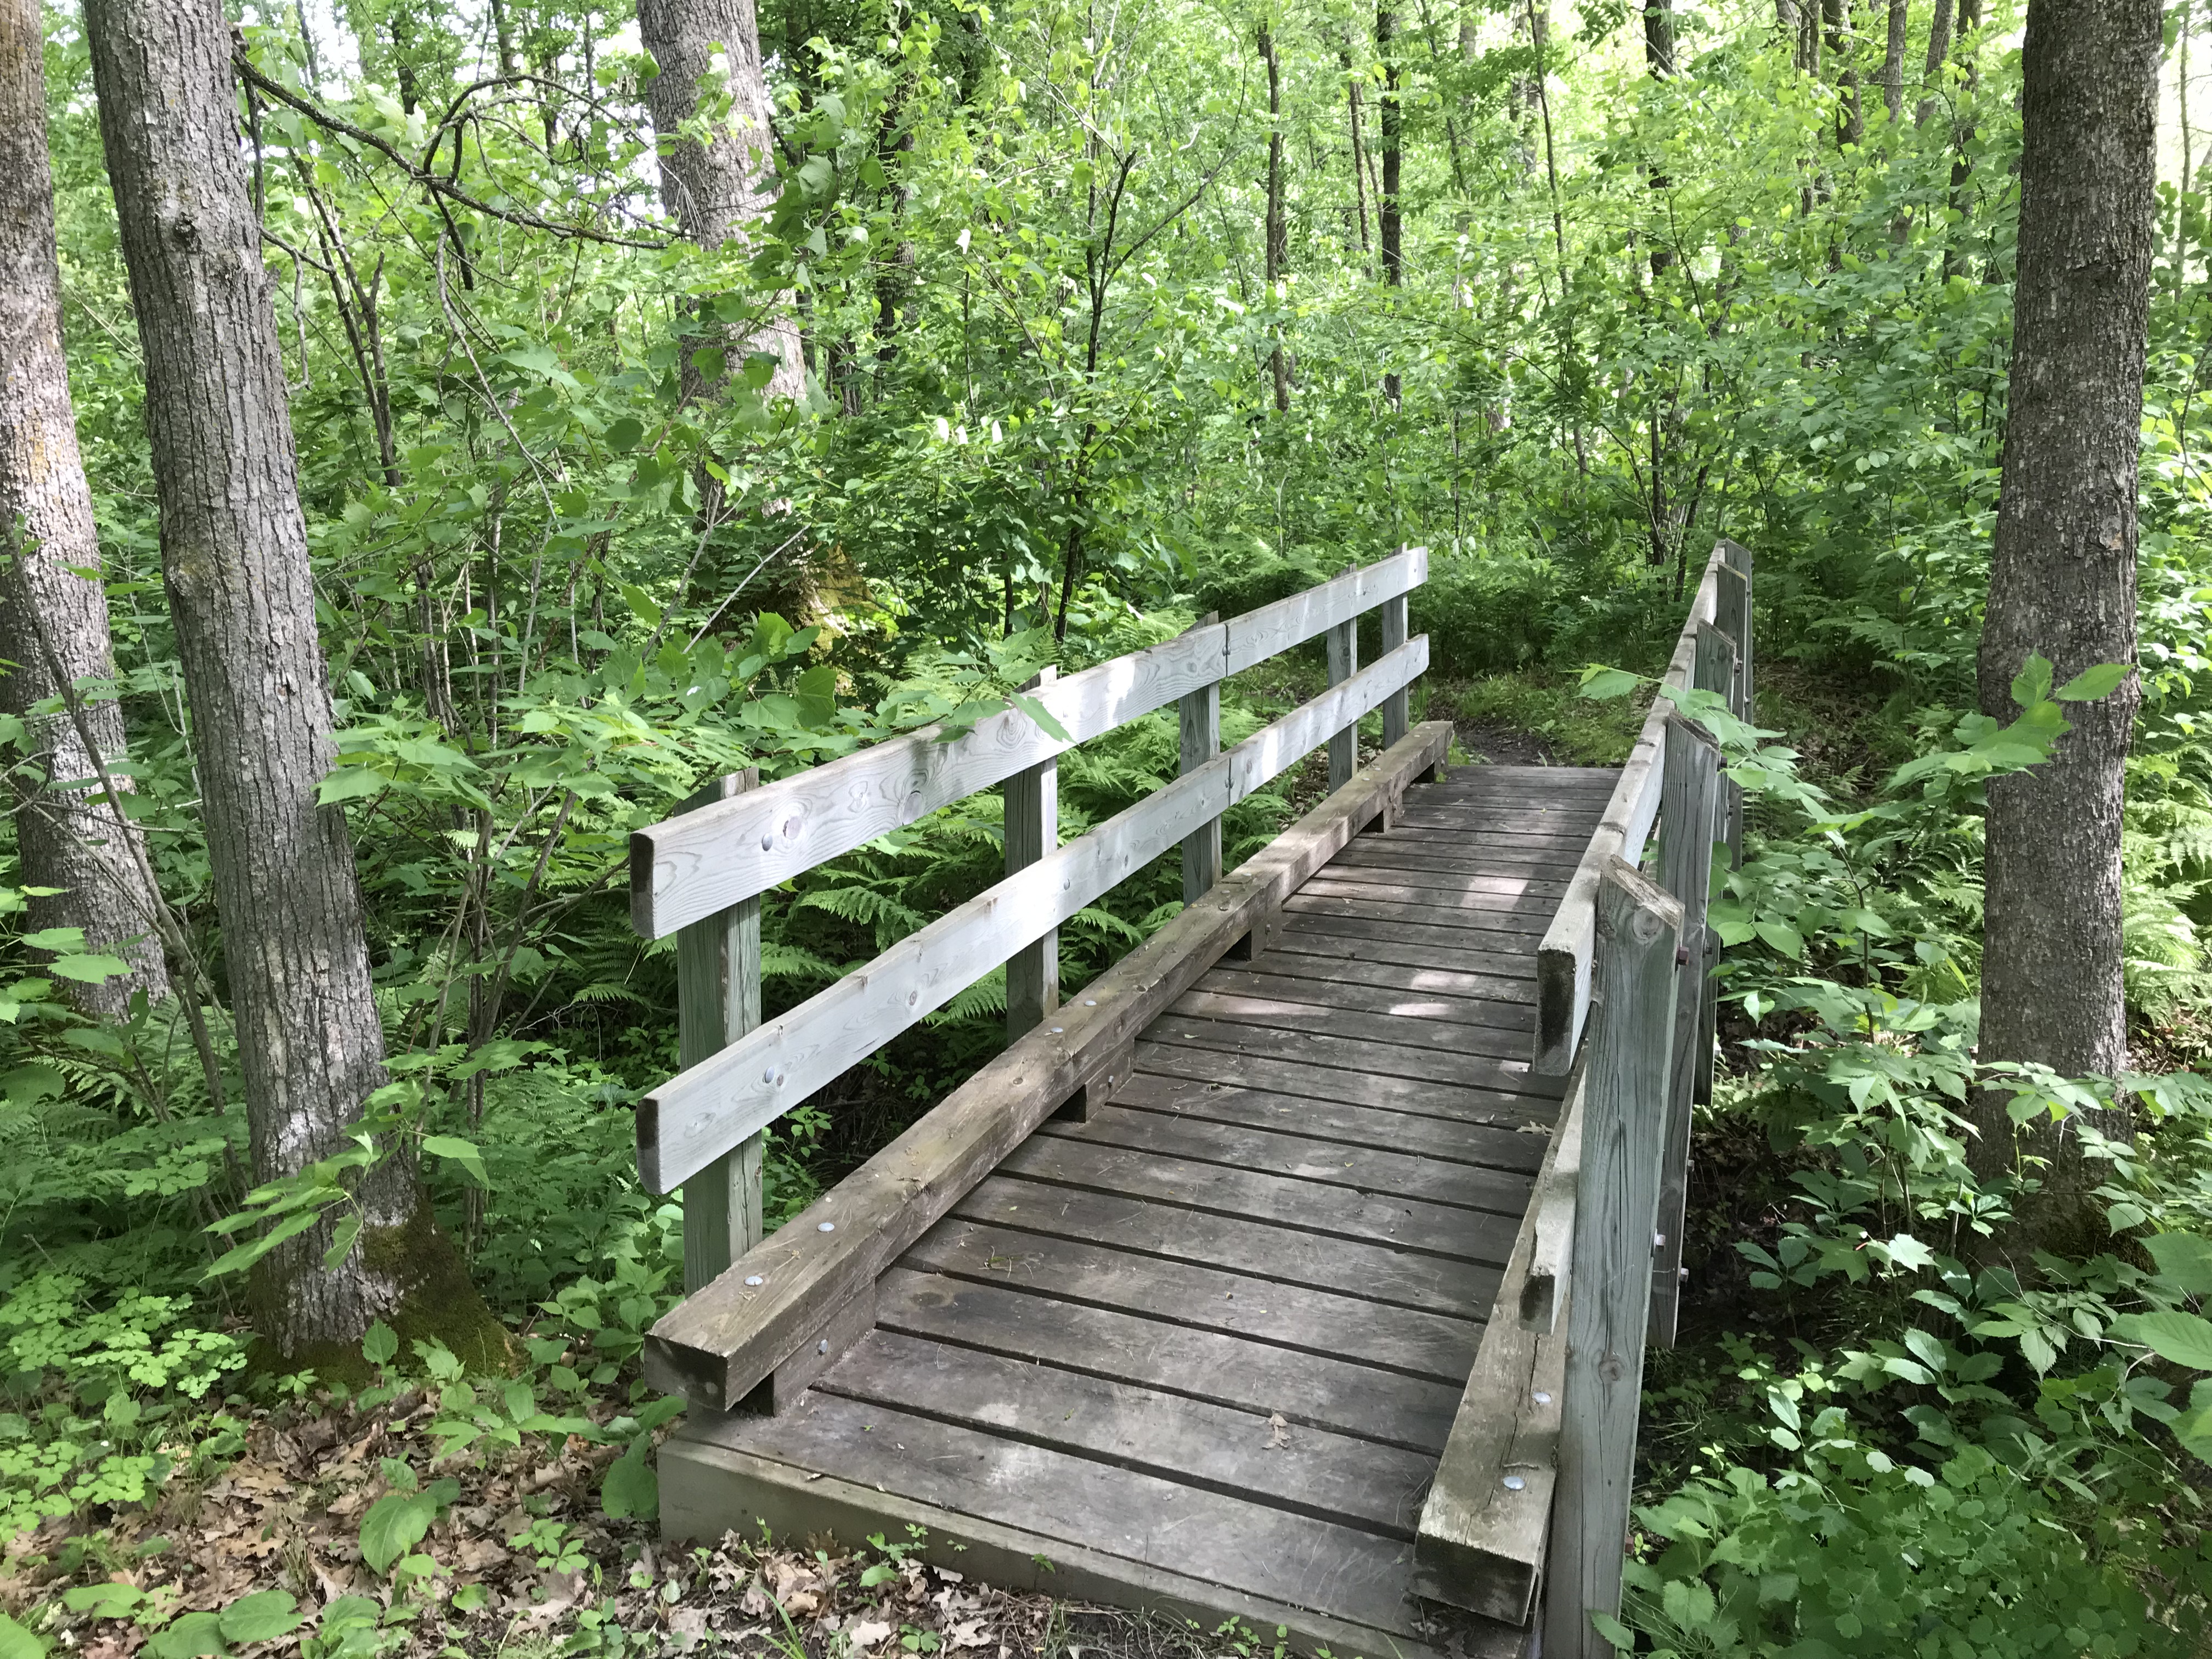 A bridge over a creek in a forest.